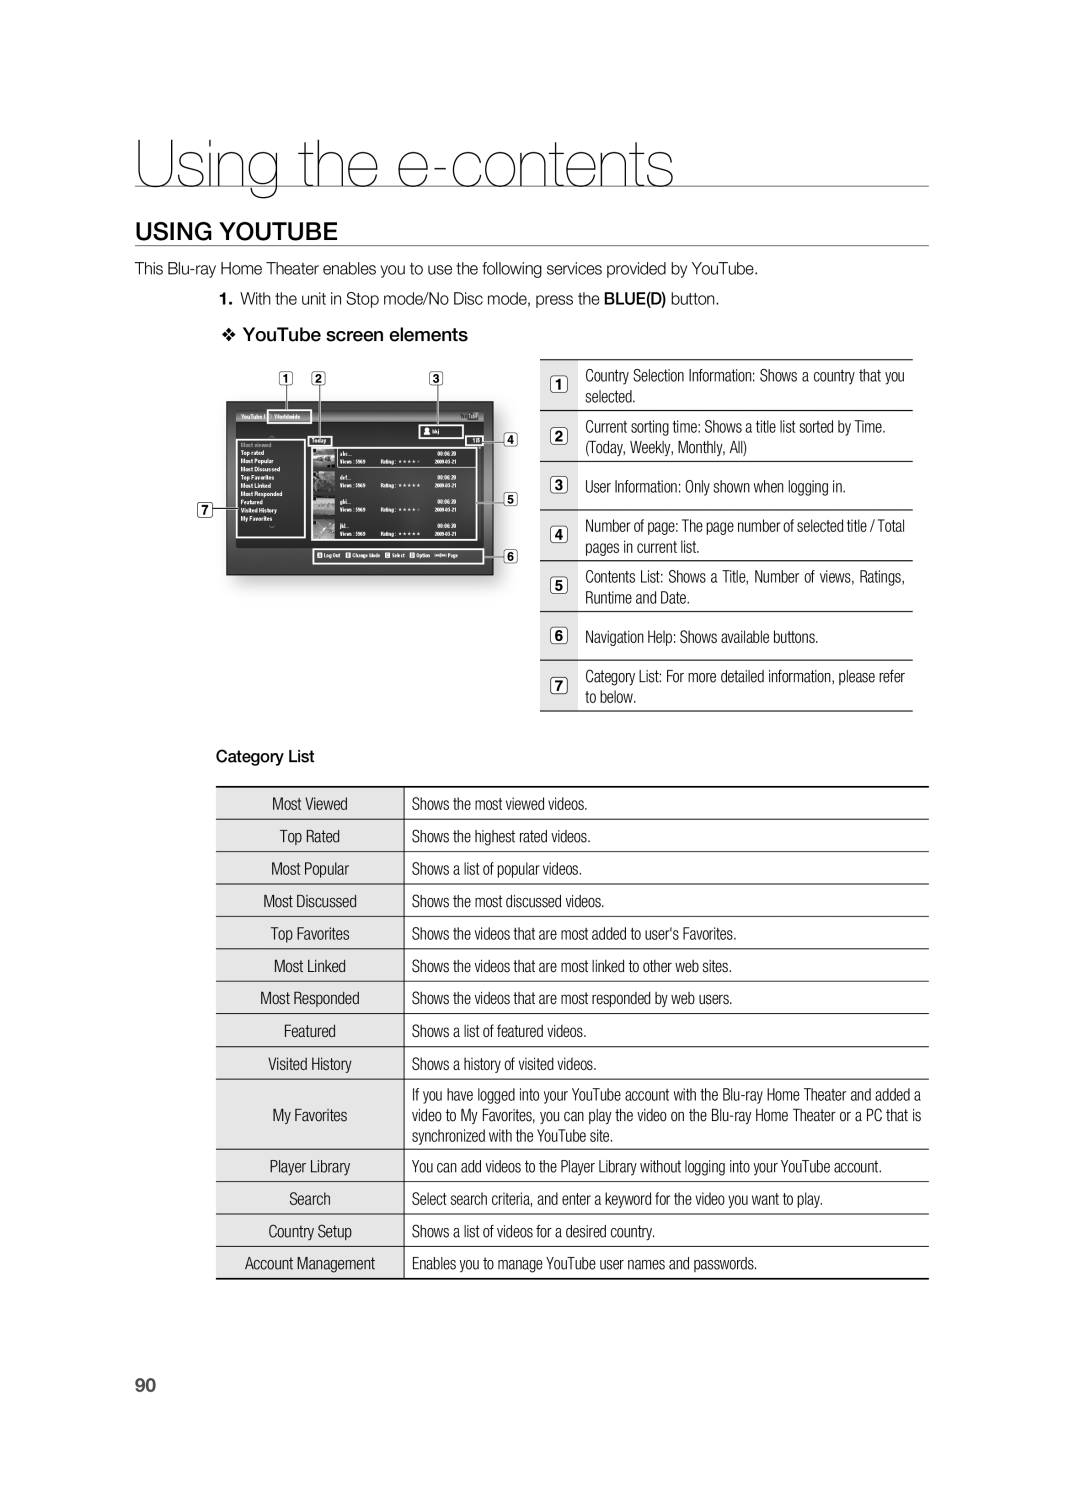 Samsung HT-BD3252 user manual Using Youtube, Using the e-contents, YouTube screen elements 